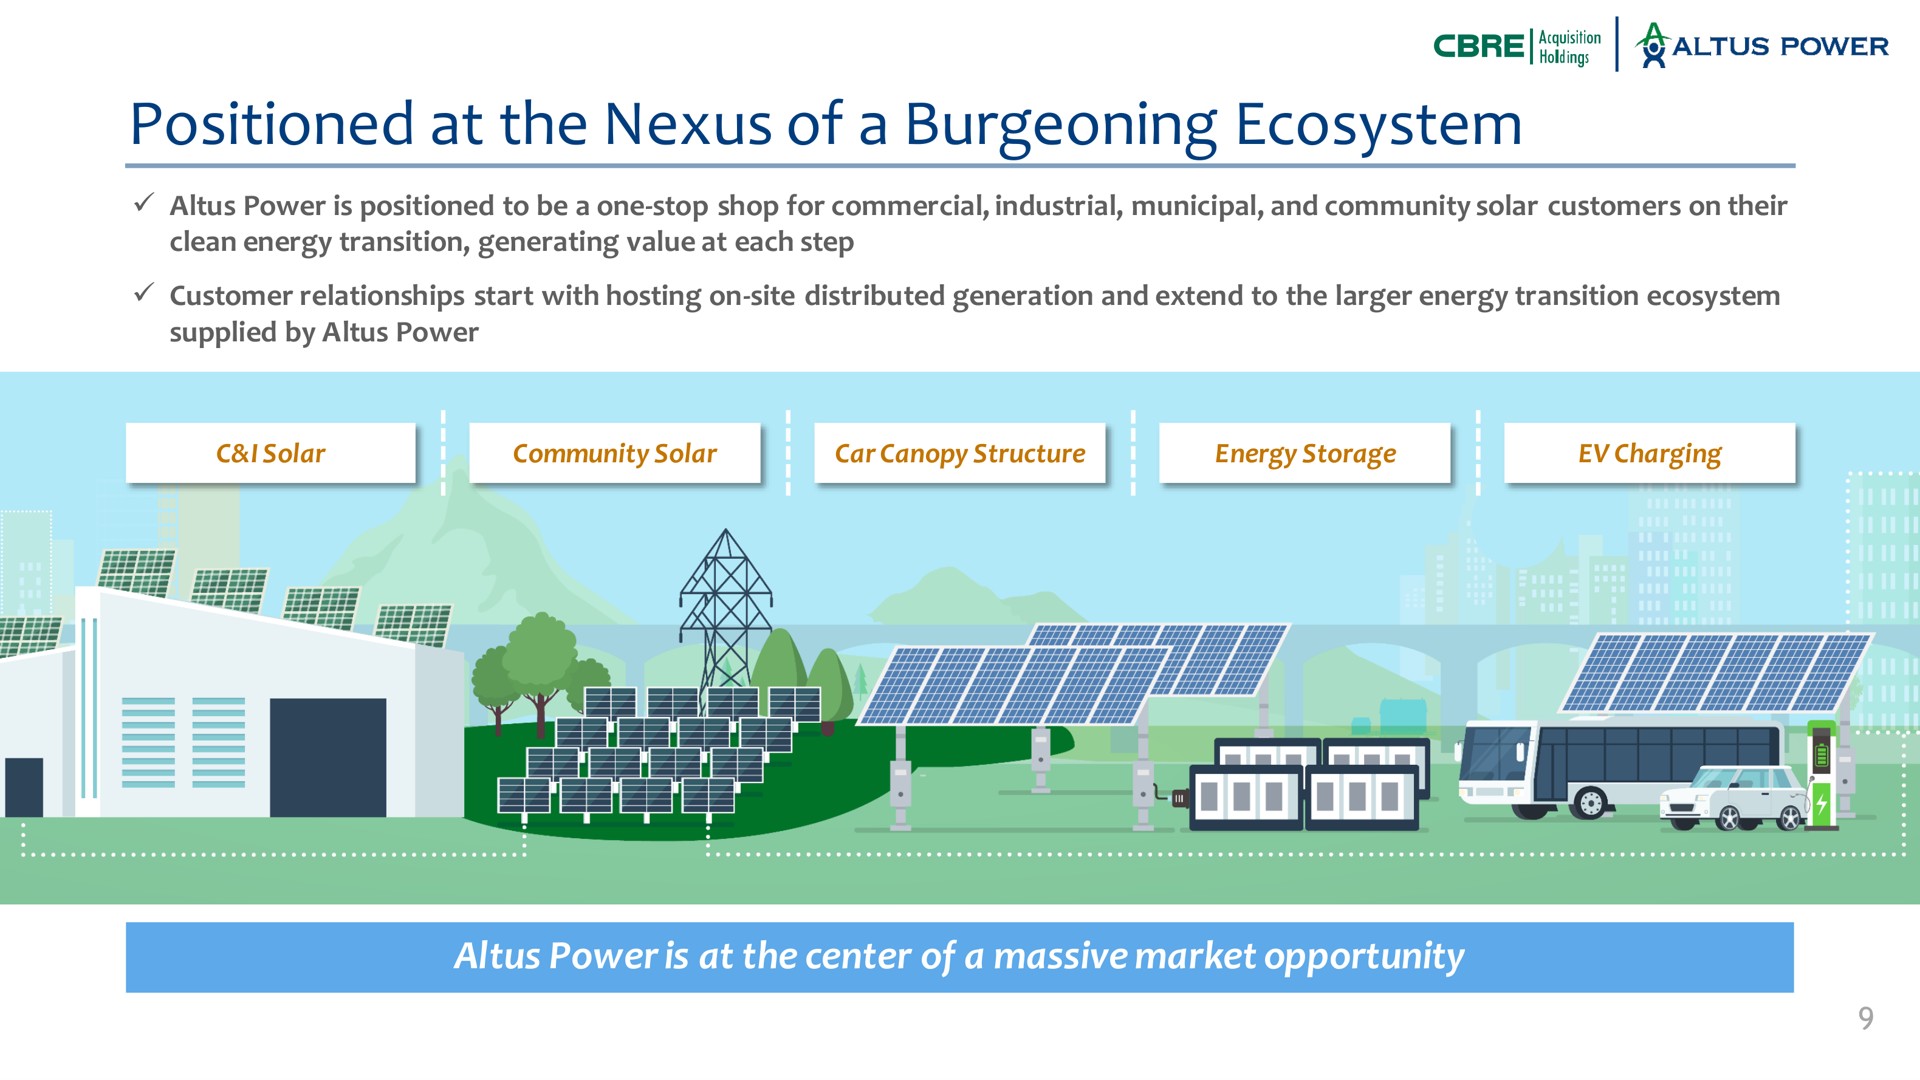 positioned at the nexus of a burgeoning ecosystem power is at the center of a massive market opportunity to be one stop shop for commercial industrial municipal and community solar customers on their clean energy transition generating value each step customer relationships start with hosting on site distributed generation and extend to energy transition supplied by i solar community solar car canopy structure energy storage charging lax | Altus Power